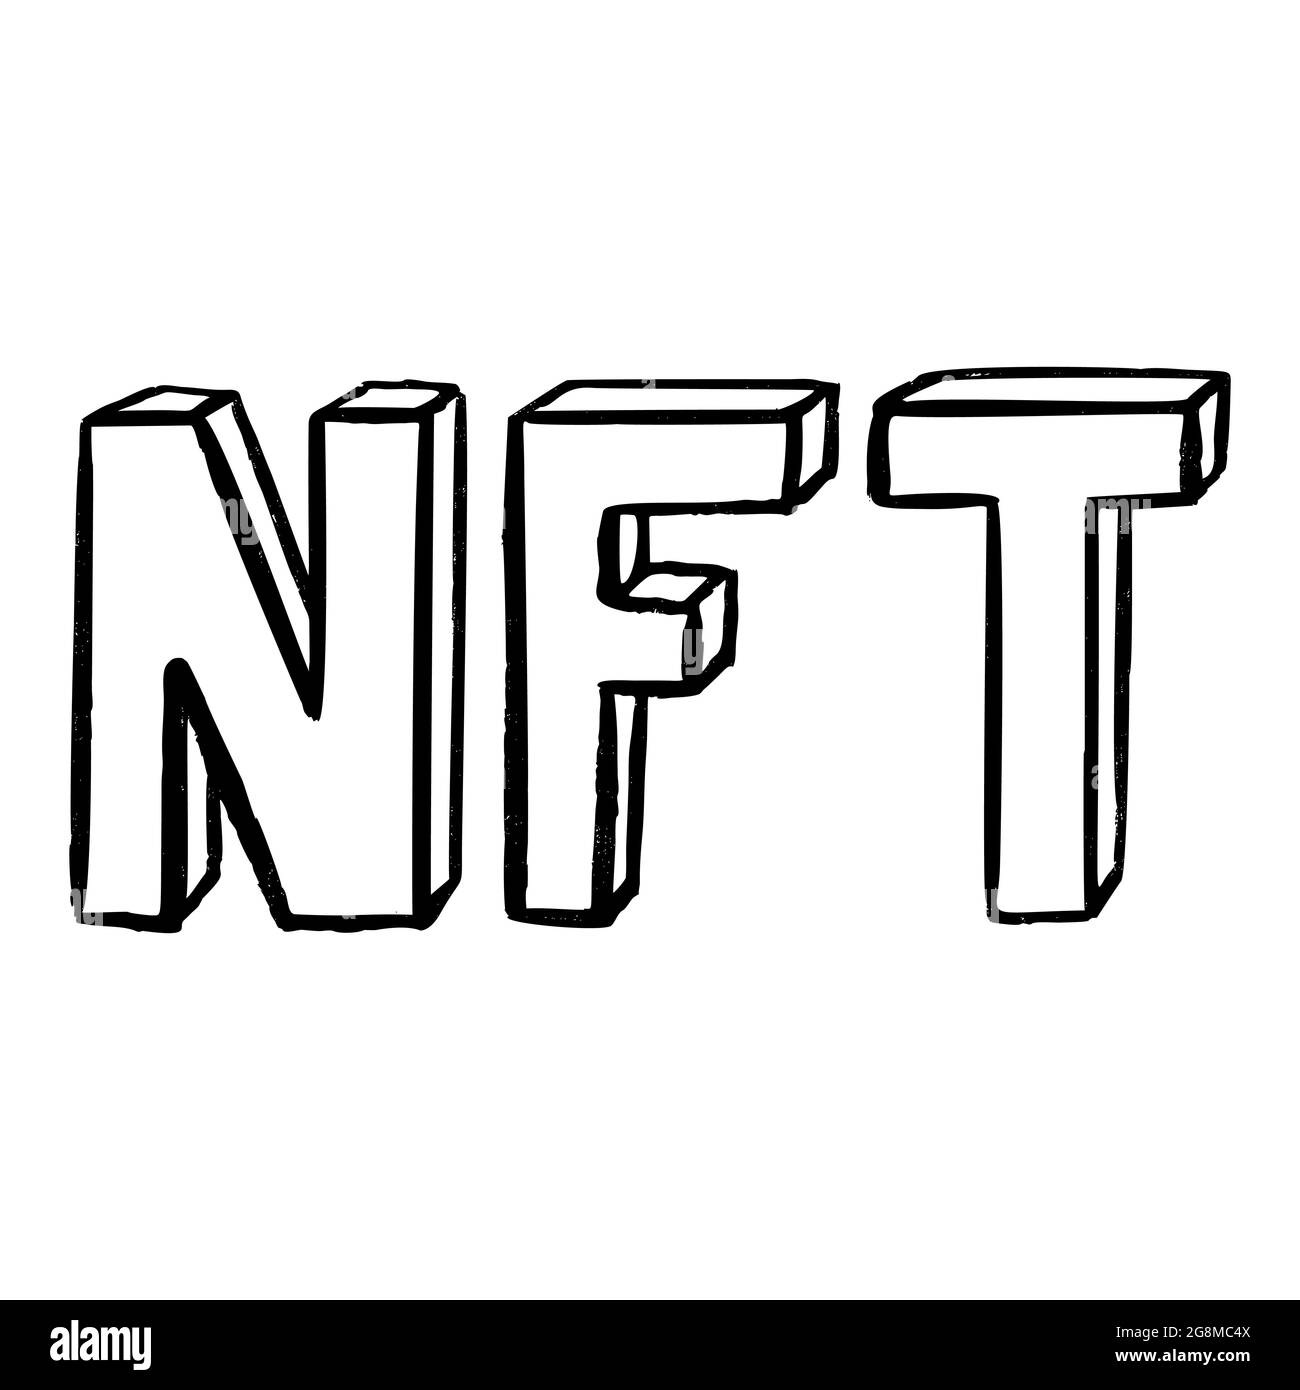 NFT non fungible token text sketch icon. Cryptocurrency art collection trendy technology. Hand drawn crypto design element. Stock Vector